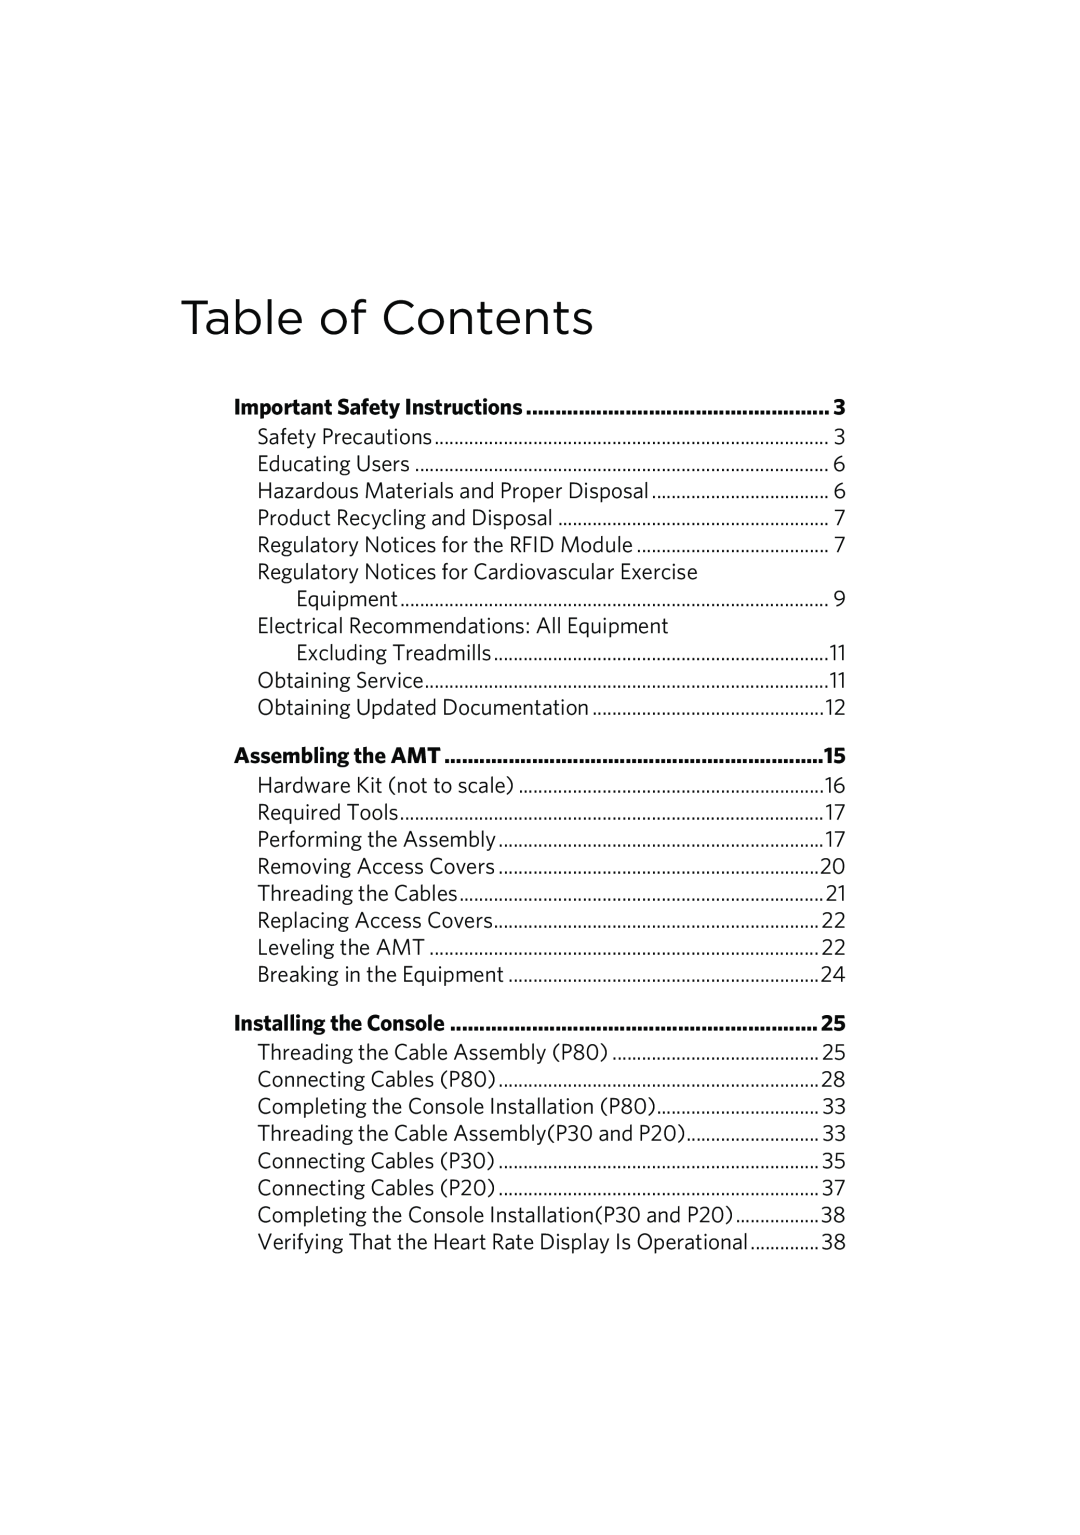 Precor P80 manual Table of Contents, Regulatory Notices for Cardiovascular Exercise 